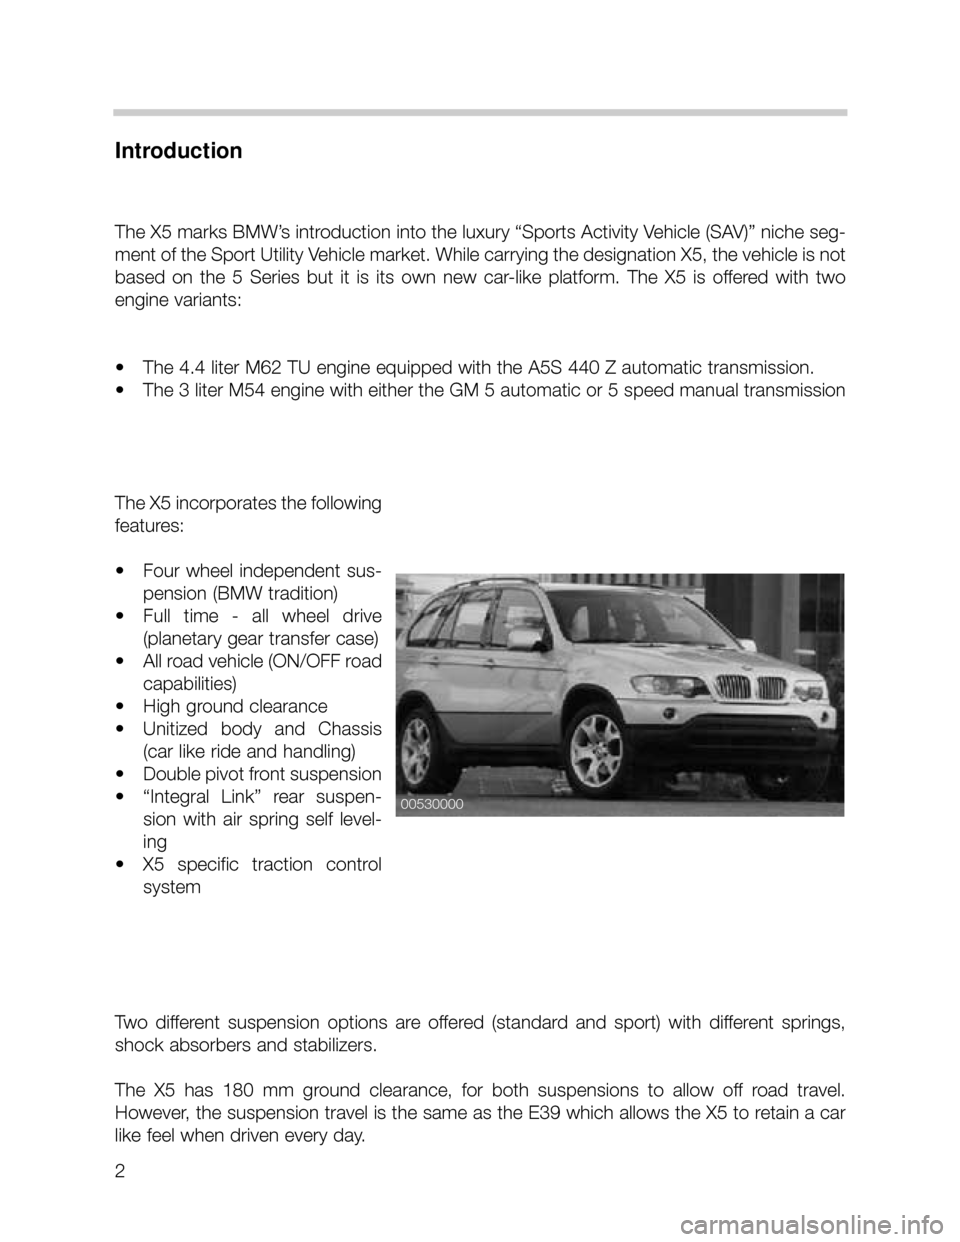 BMW X5 2006 E53 Workshop Manual 2
Introduction
The X5 marks BMW’s introduction into the luxury “Sports Activity Vehicle (SAV)” niche seg-
ment of the Sport Utility Vehicle market. While carrying the designation X5, the vehicle